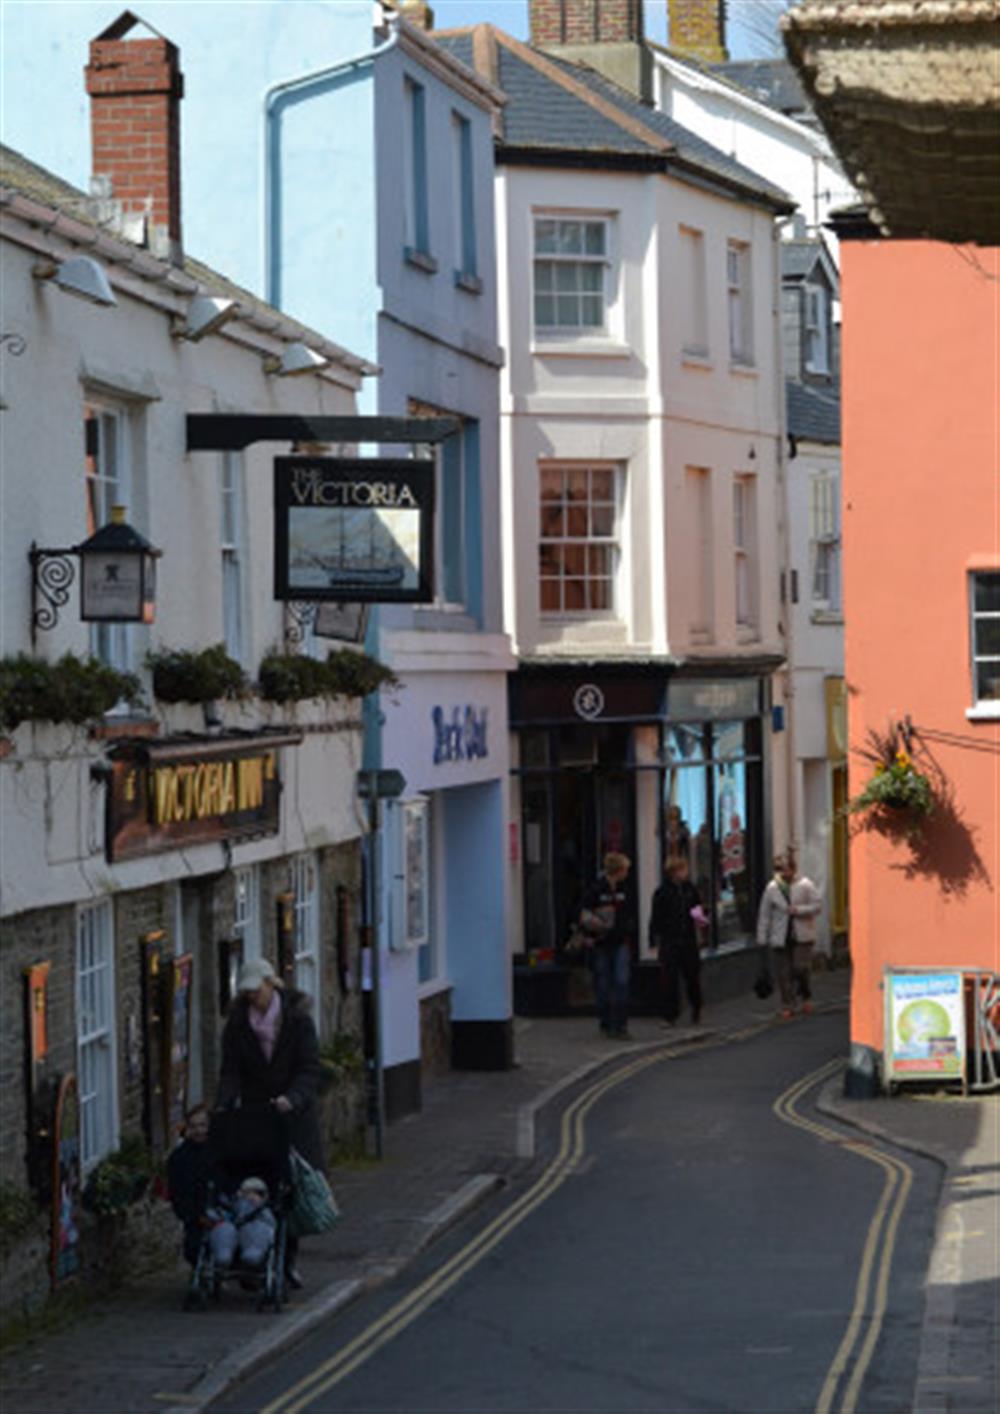 Great pubs and shops on the doorstep